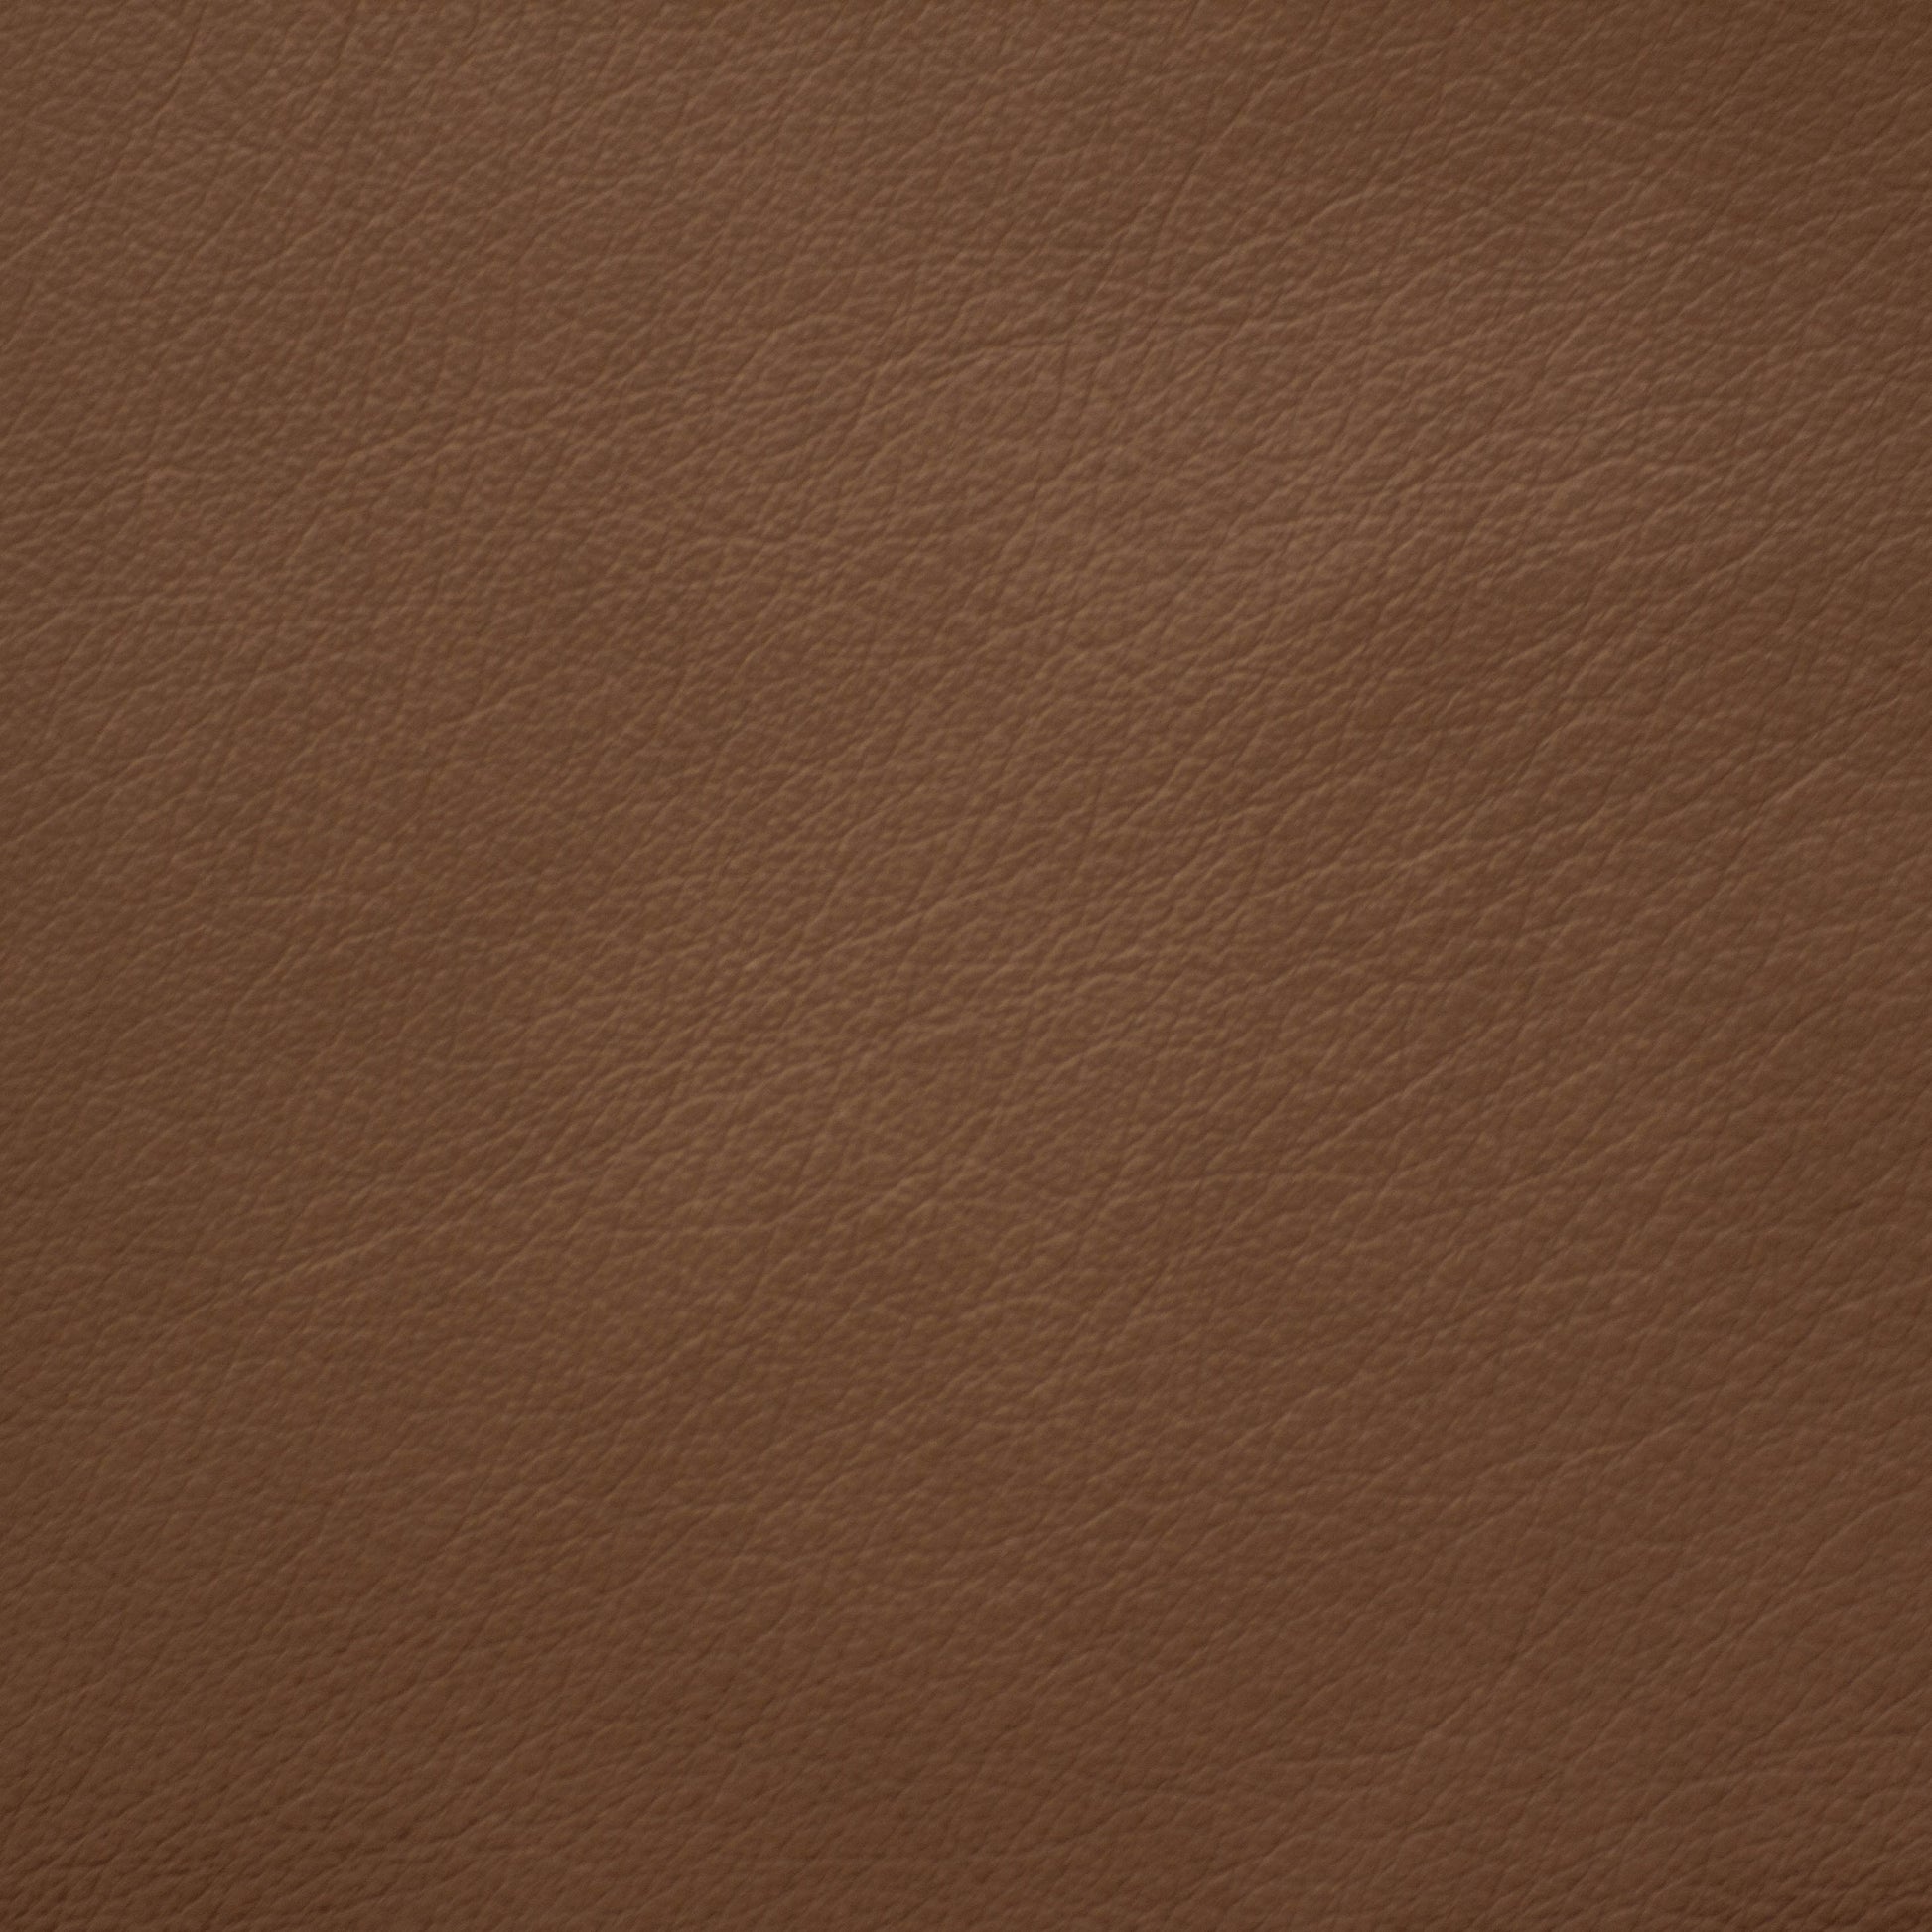 Trattoria, Porcini, Spilltop® Water Resistance, Hospitality Leather Hide